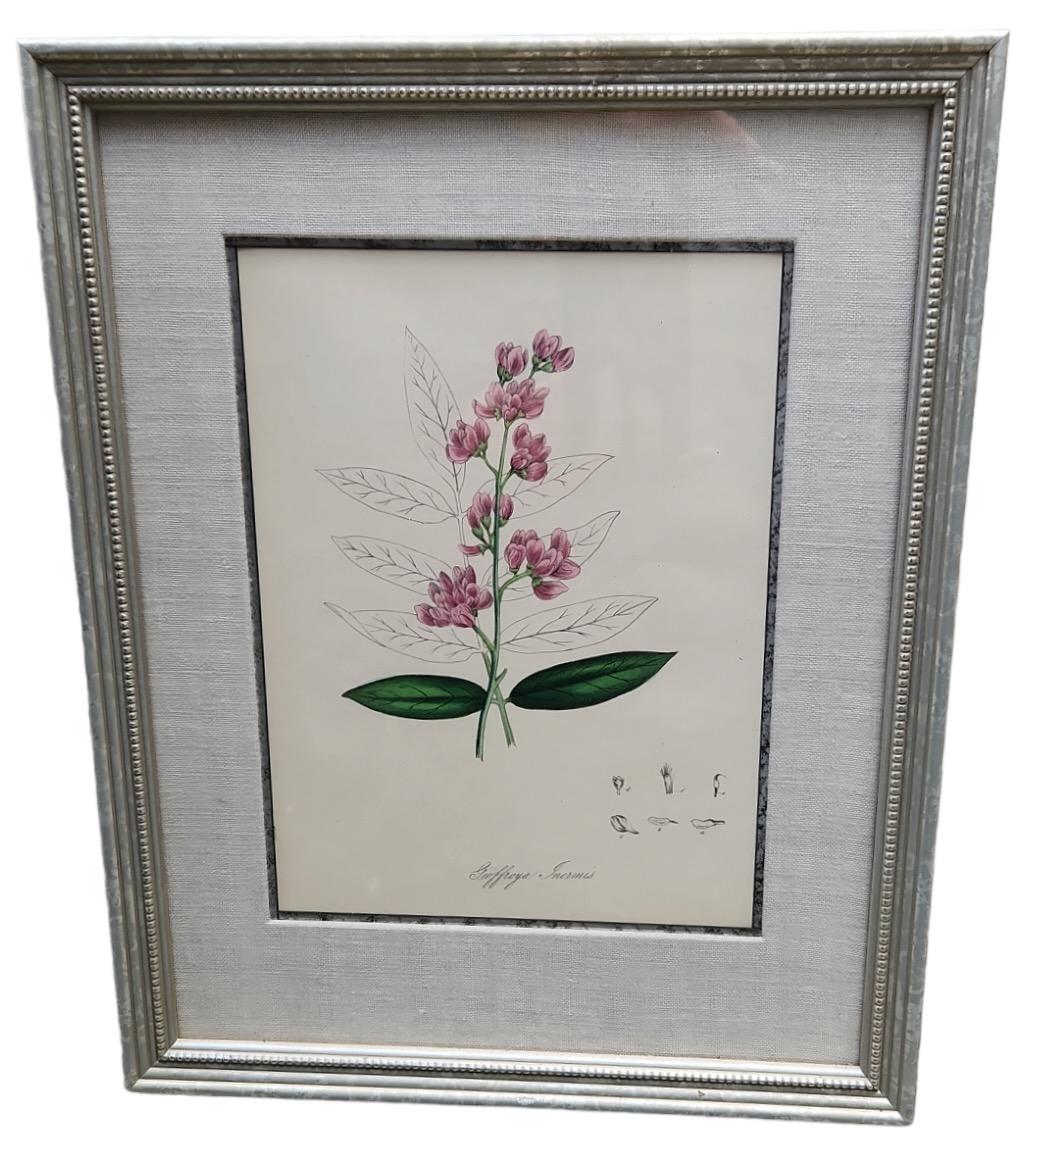 Late 19th century finely detailed. Hand detailed botanical lithographs. Newly framed and matted. Silver leaf frame. Linen matte. 34 left.